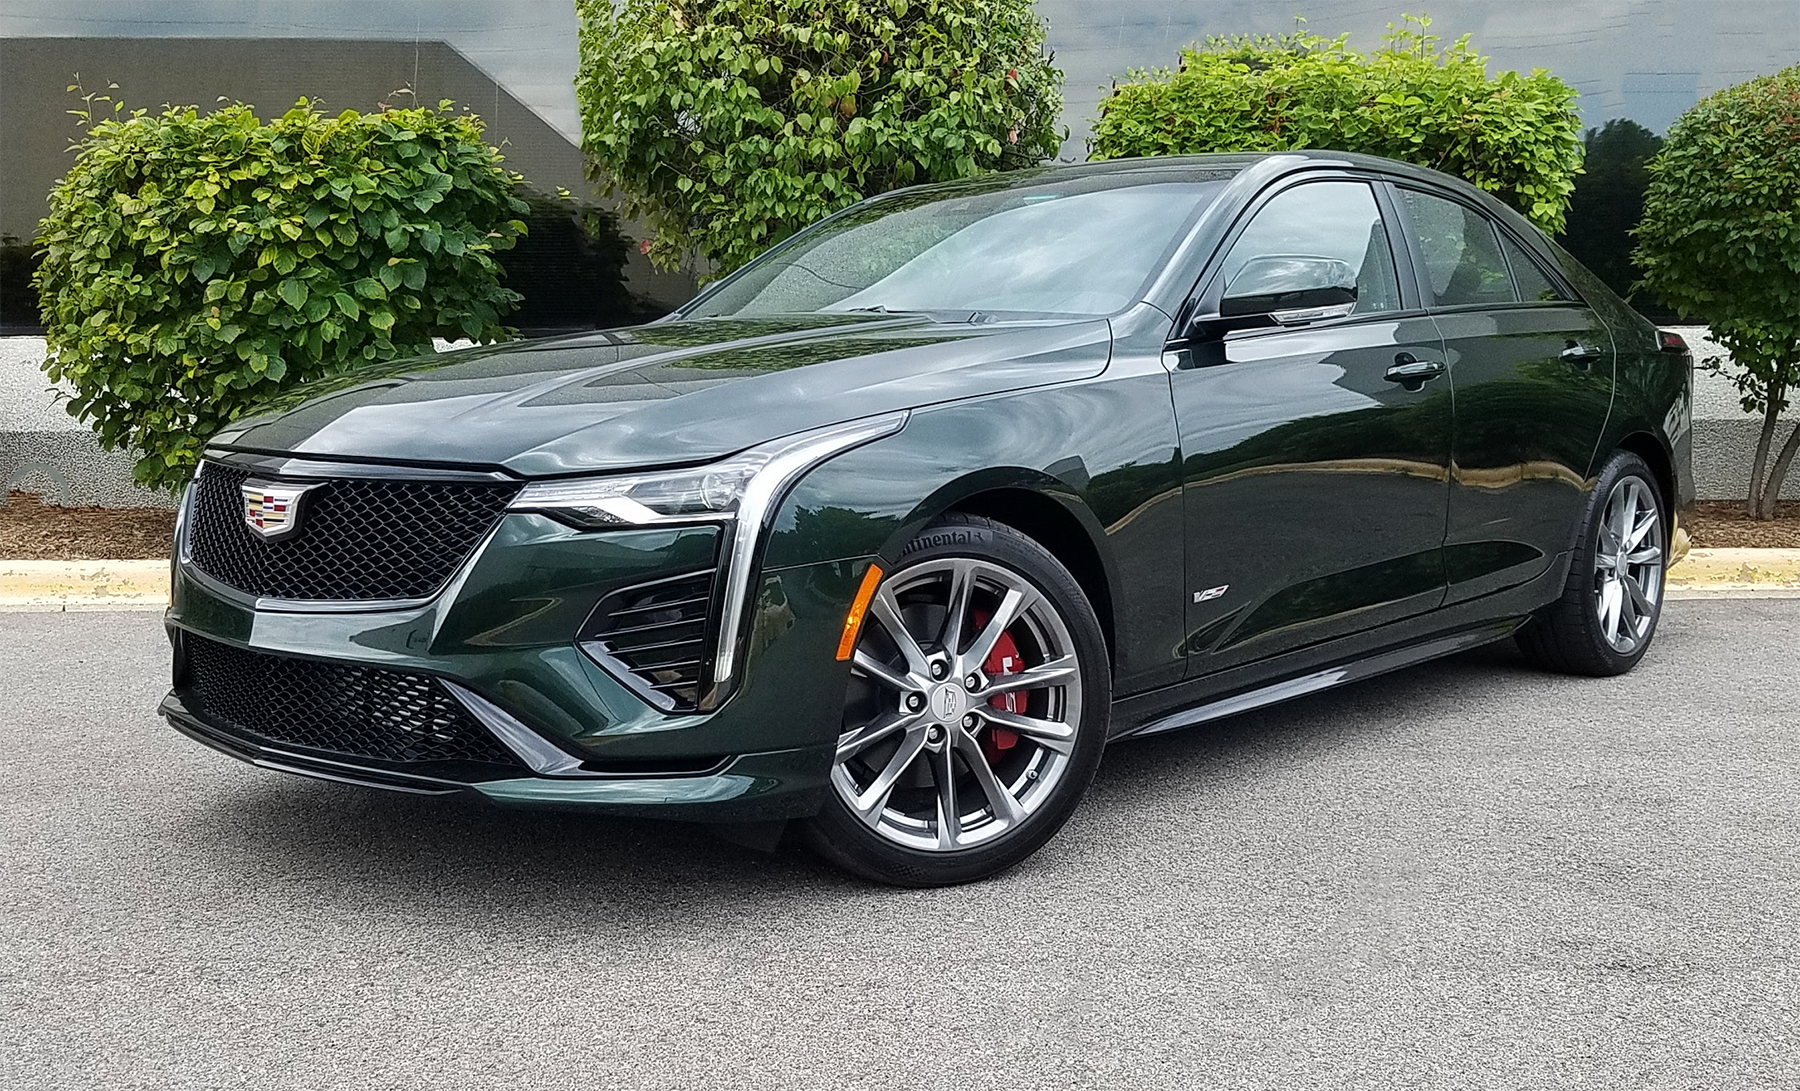 Test Drive: 2020 Cadillac CT4-V | The Daily Drive | Consumer Guide® The  Daily Drive | Consumer Guide®